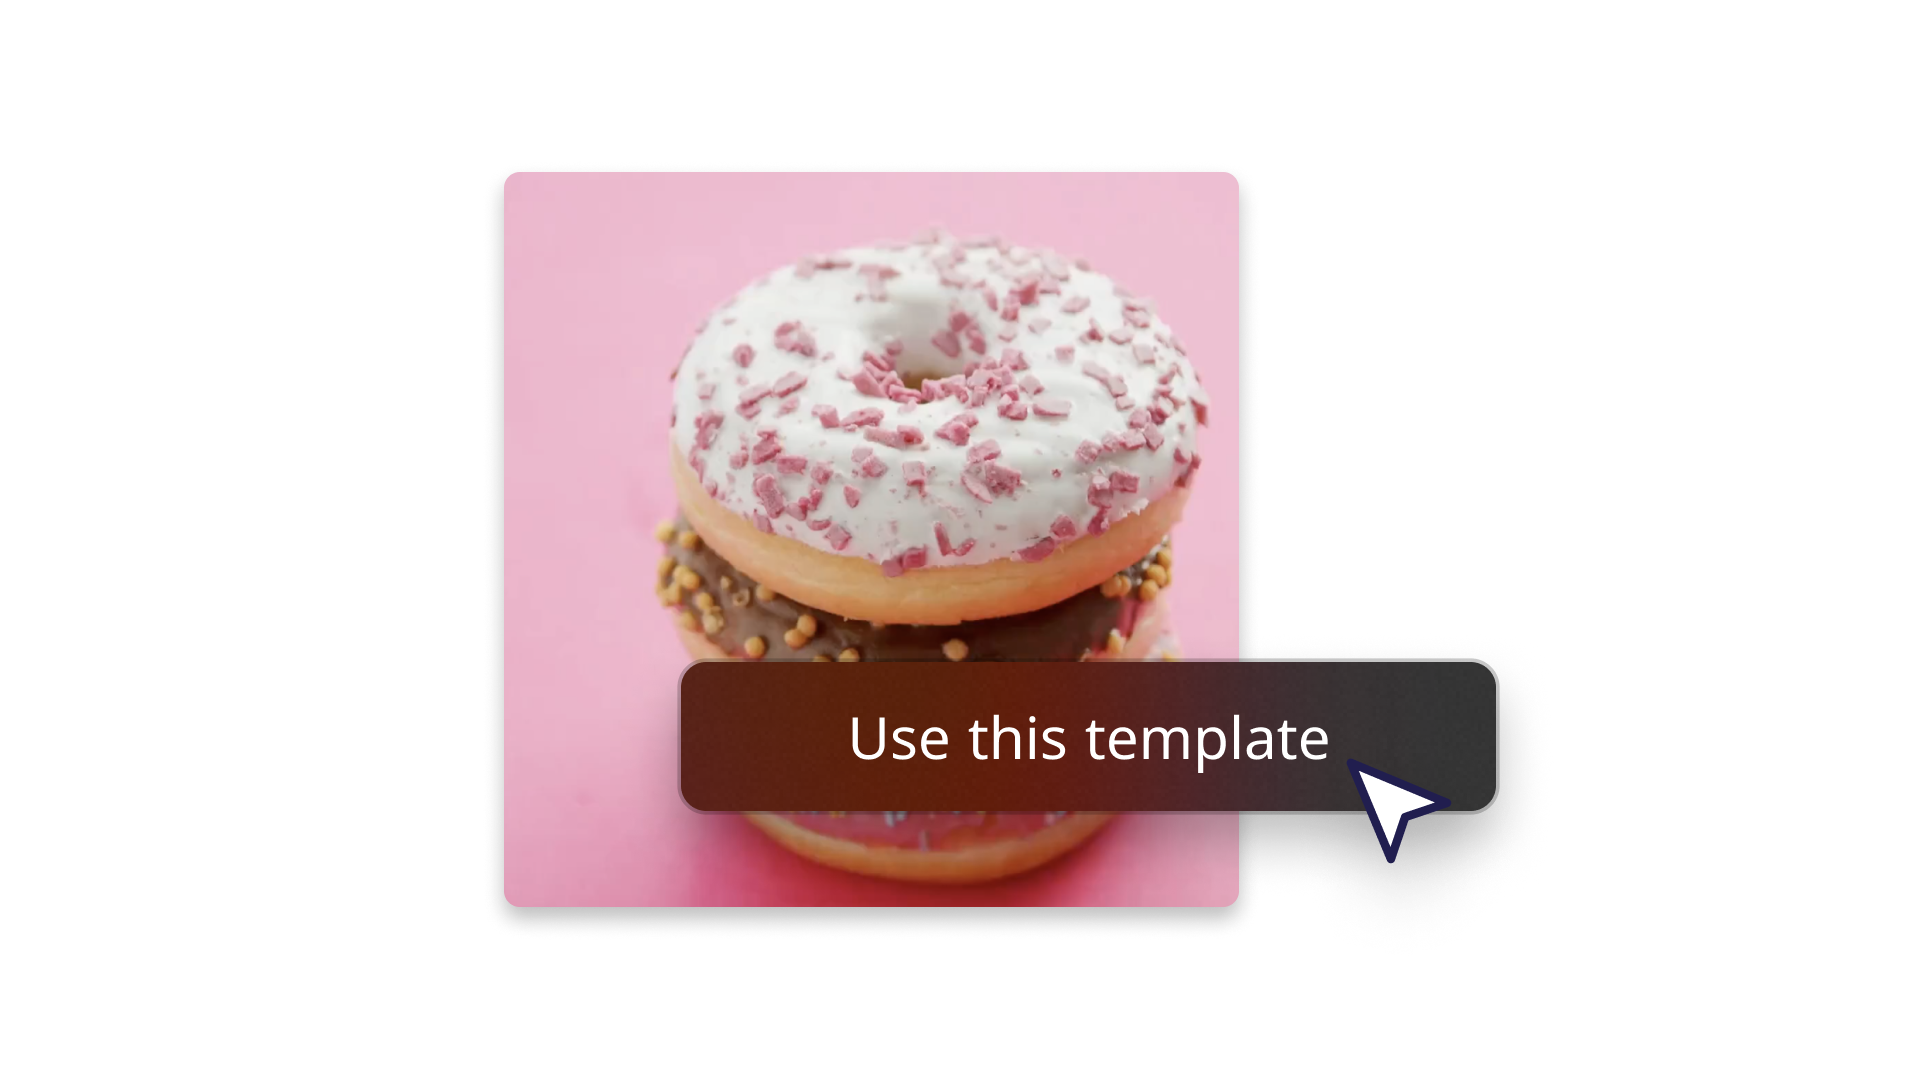 Abstract image featuring a donut showing how to use a template 